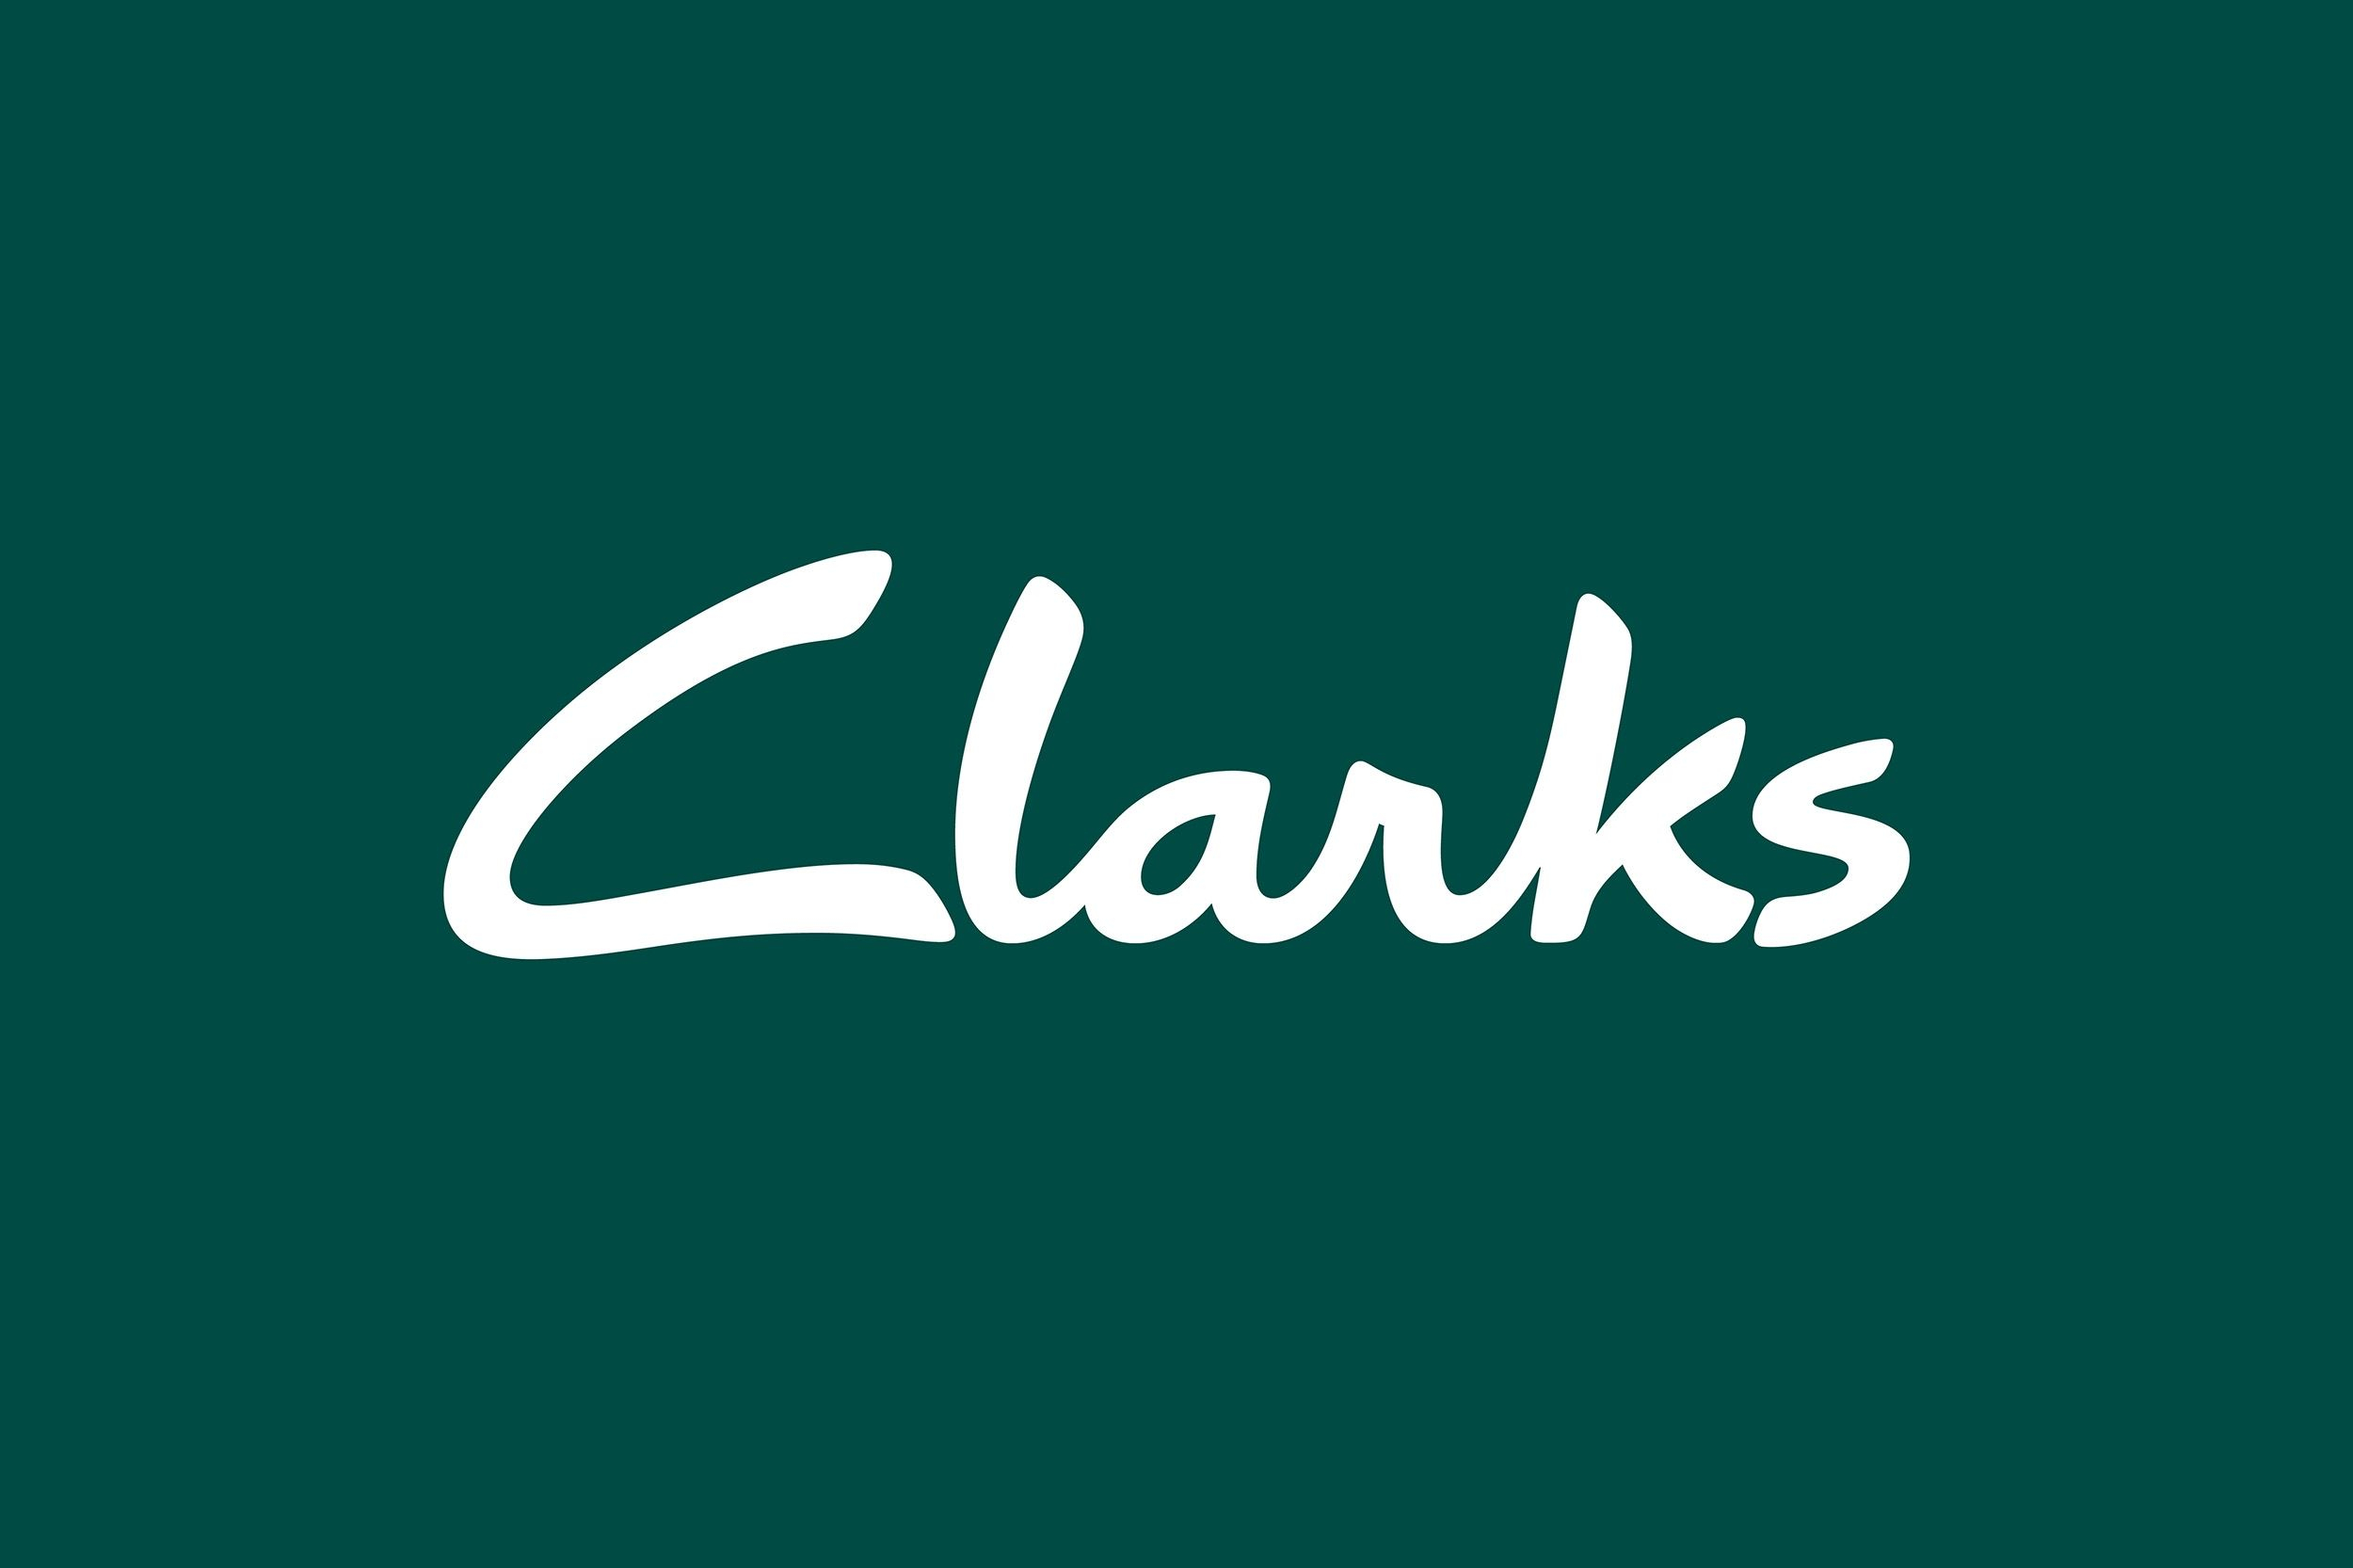 clarks discount code may 2019